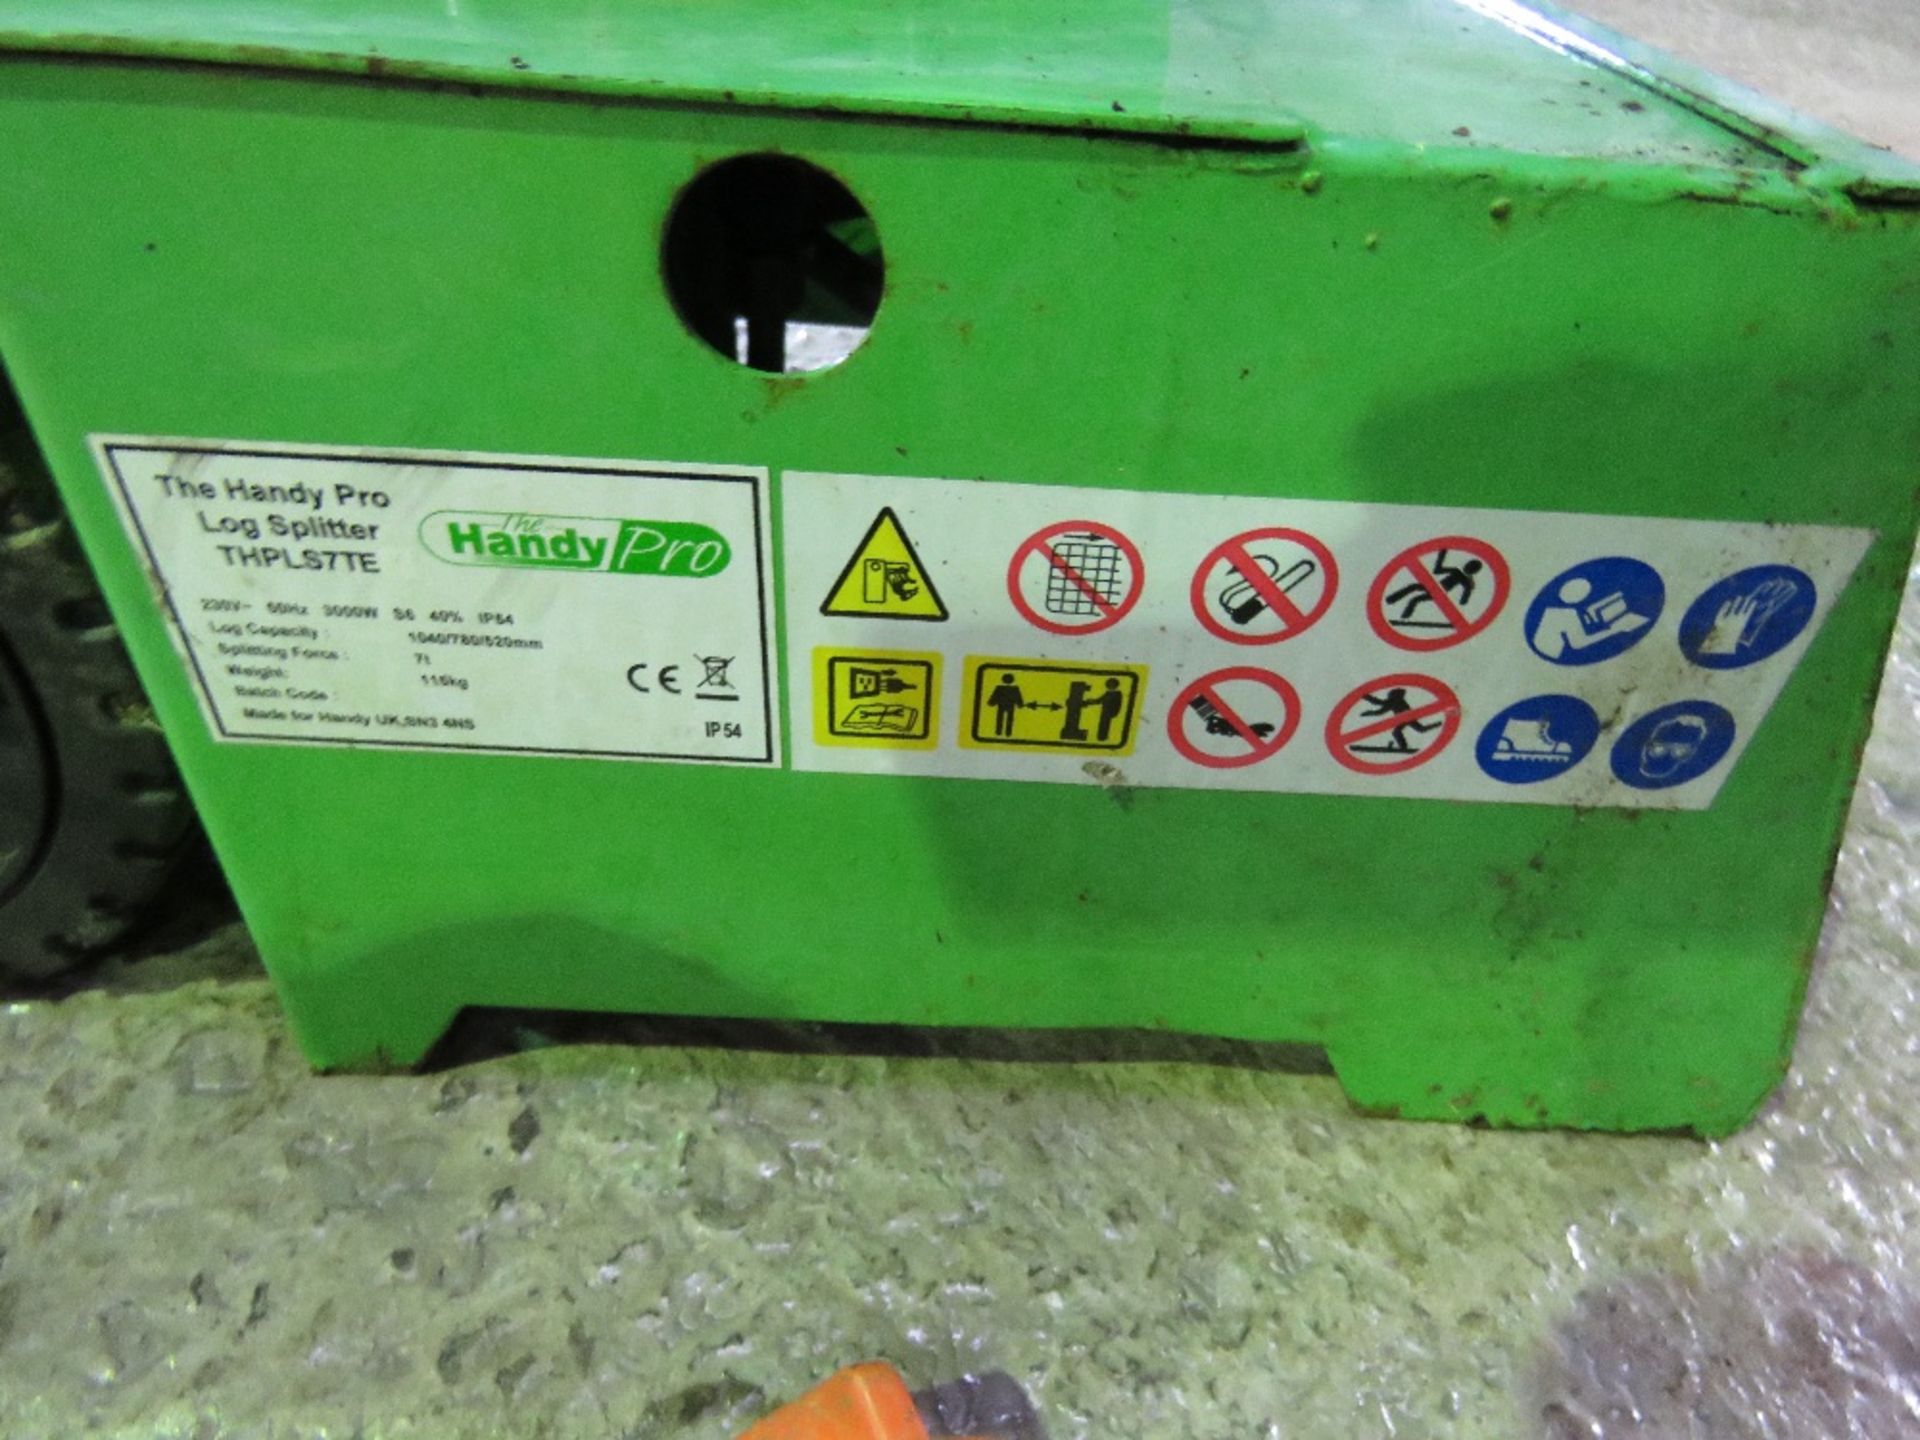 HANDYPRO 240VOLT POWERED UPRIGHT LOG SPLITTER, CONDITION UNKNOWN. THIS LOT IS SOLD UNDER THE AUCT - Image 4 of 5